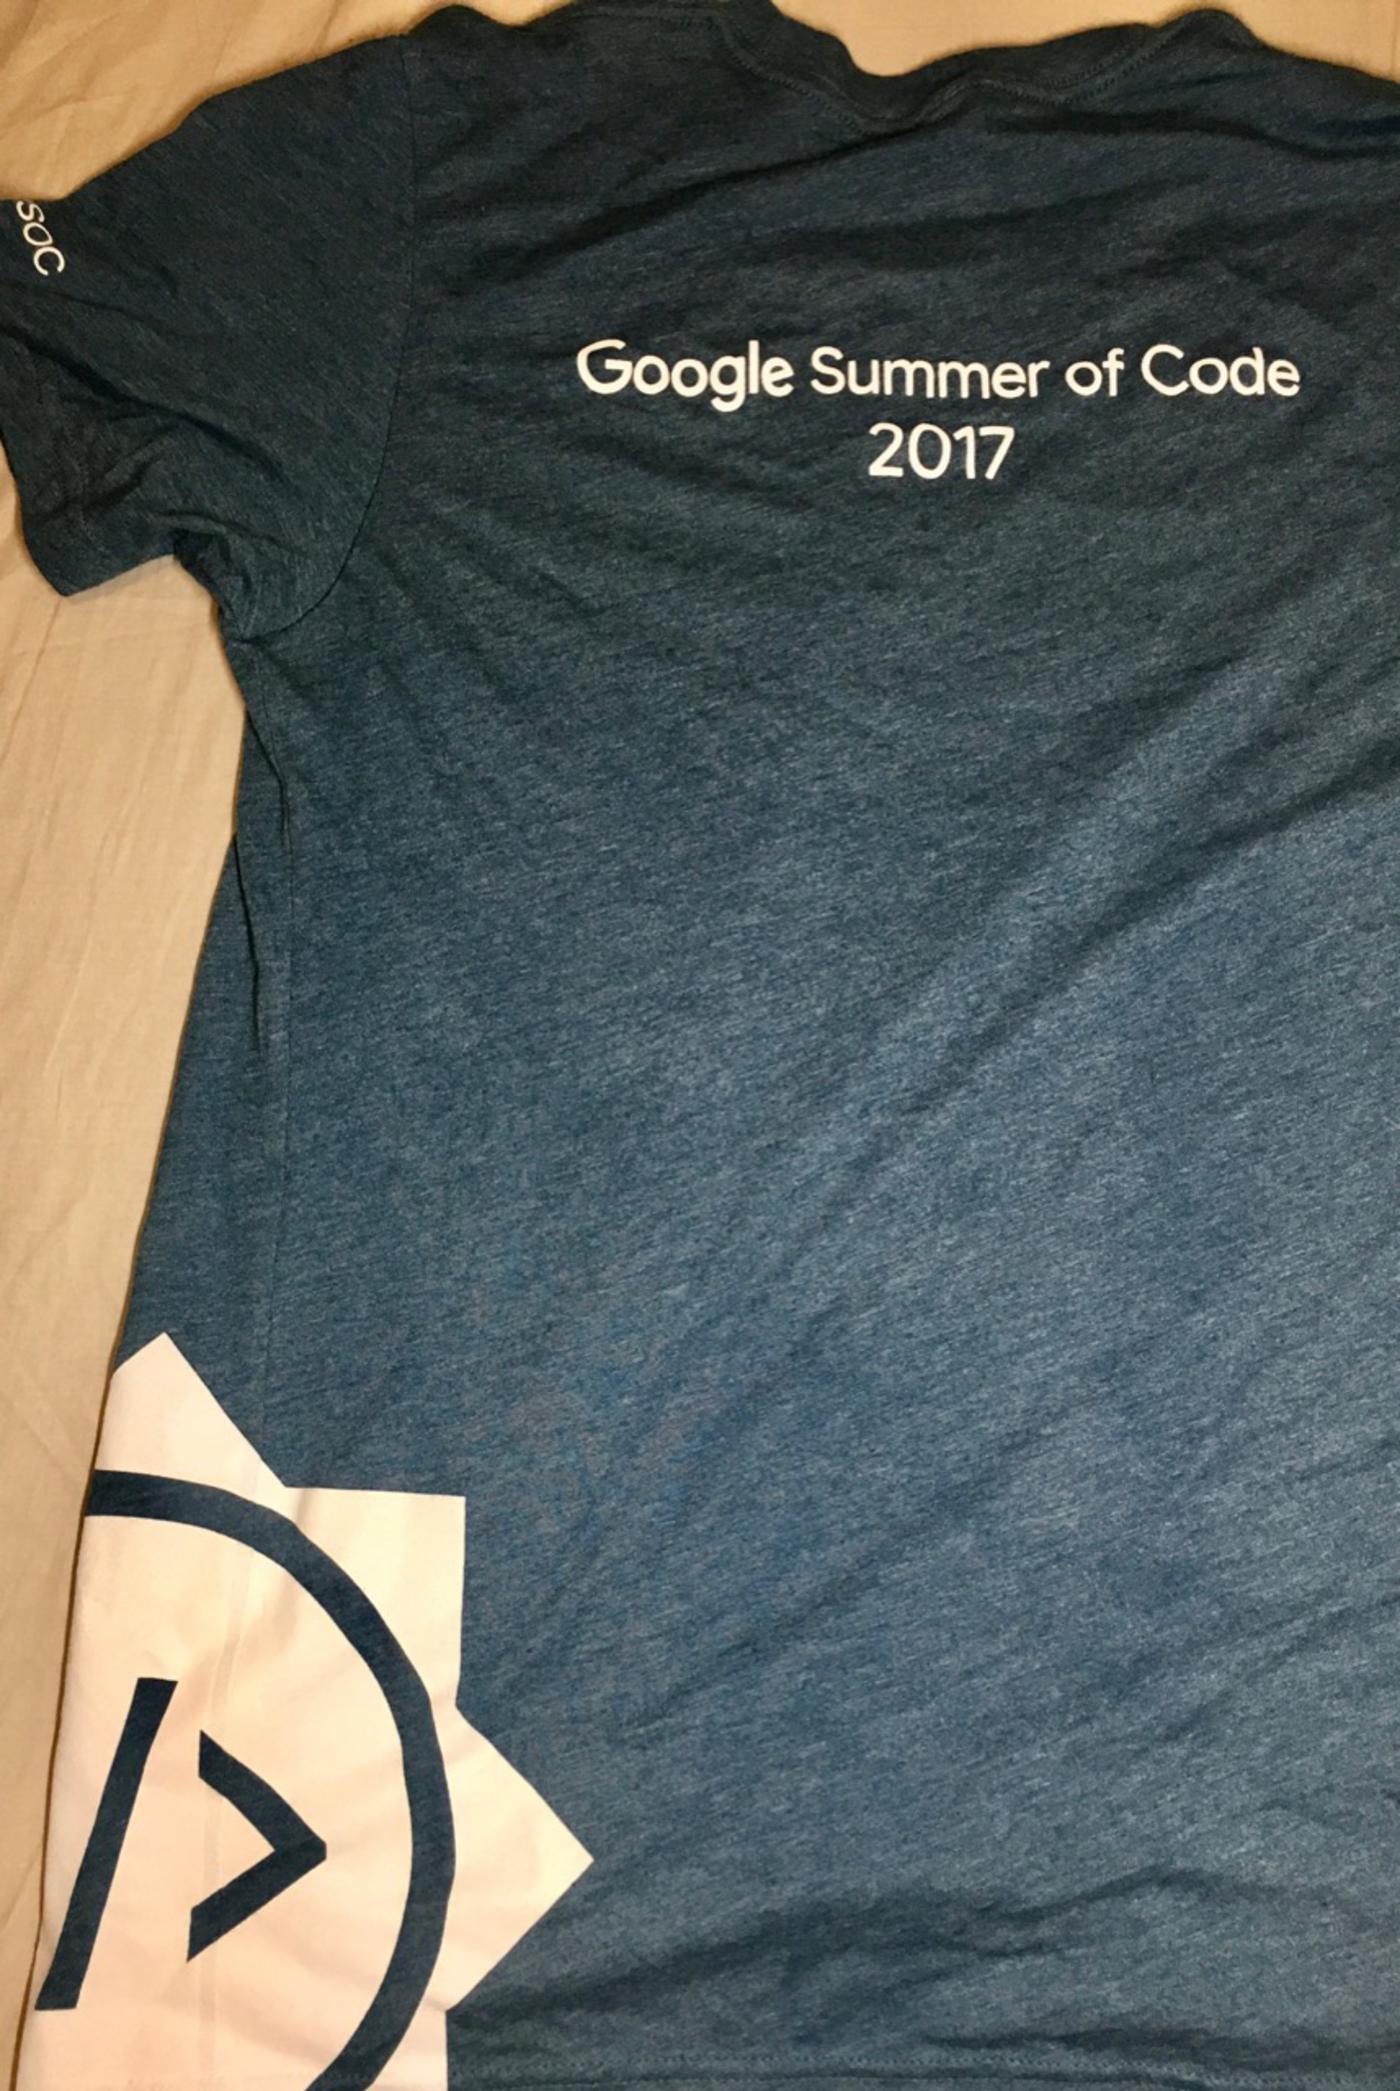 3 steps to start Google Summer of Code with Discourse